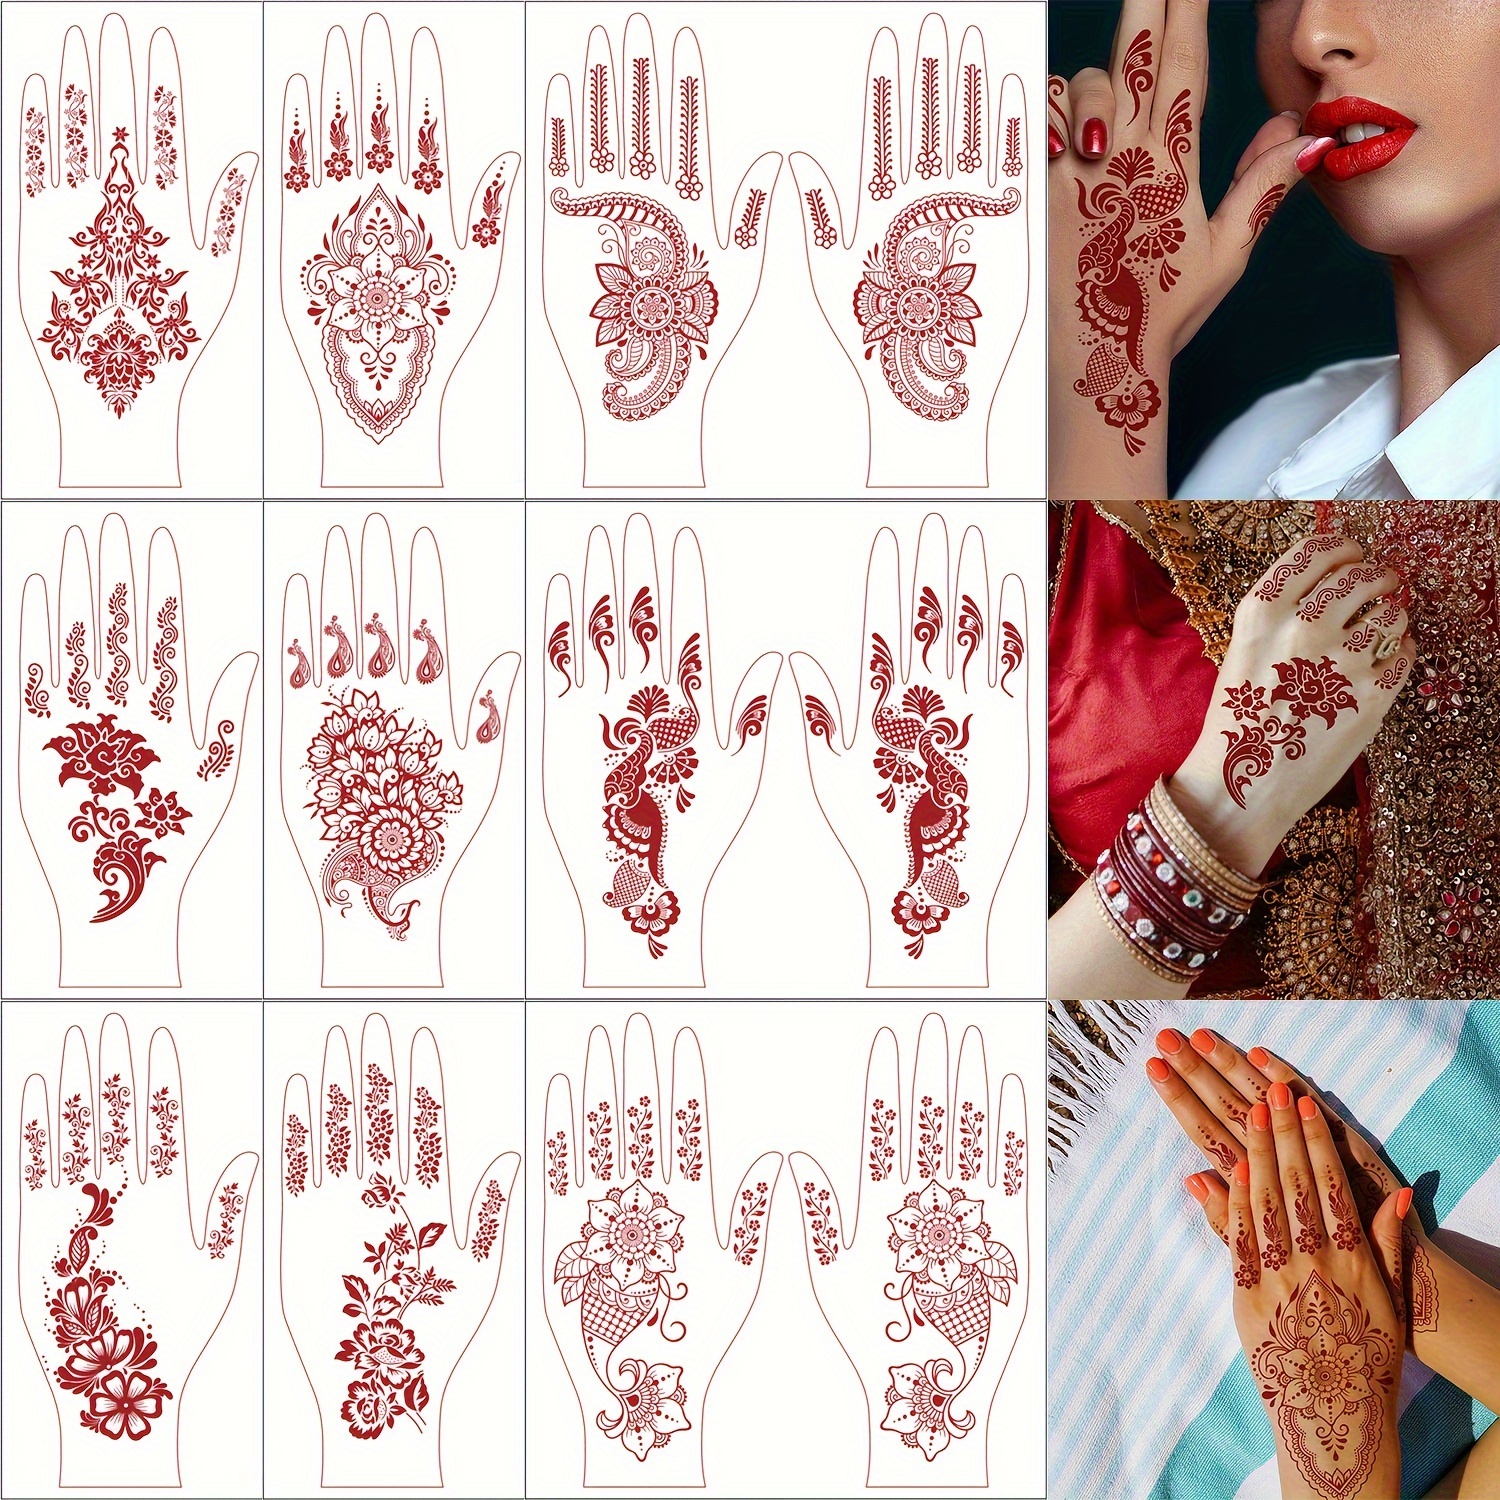 

Elegant Crimson Lace Pattern Temporary Tattoo Sticker For Women - Waterproof & Sweat-resistant, Perfect For Weddings & Parties